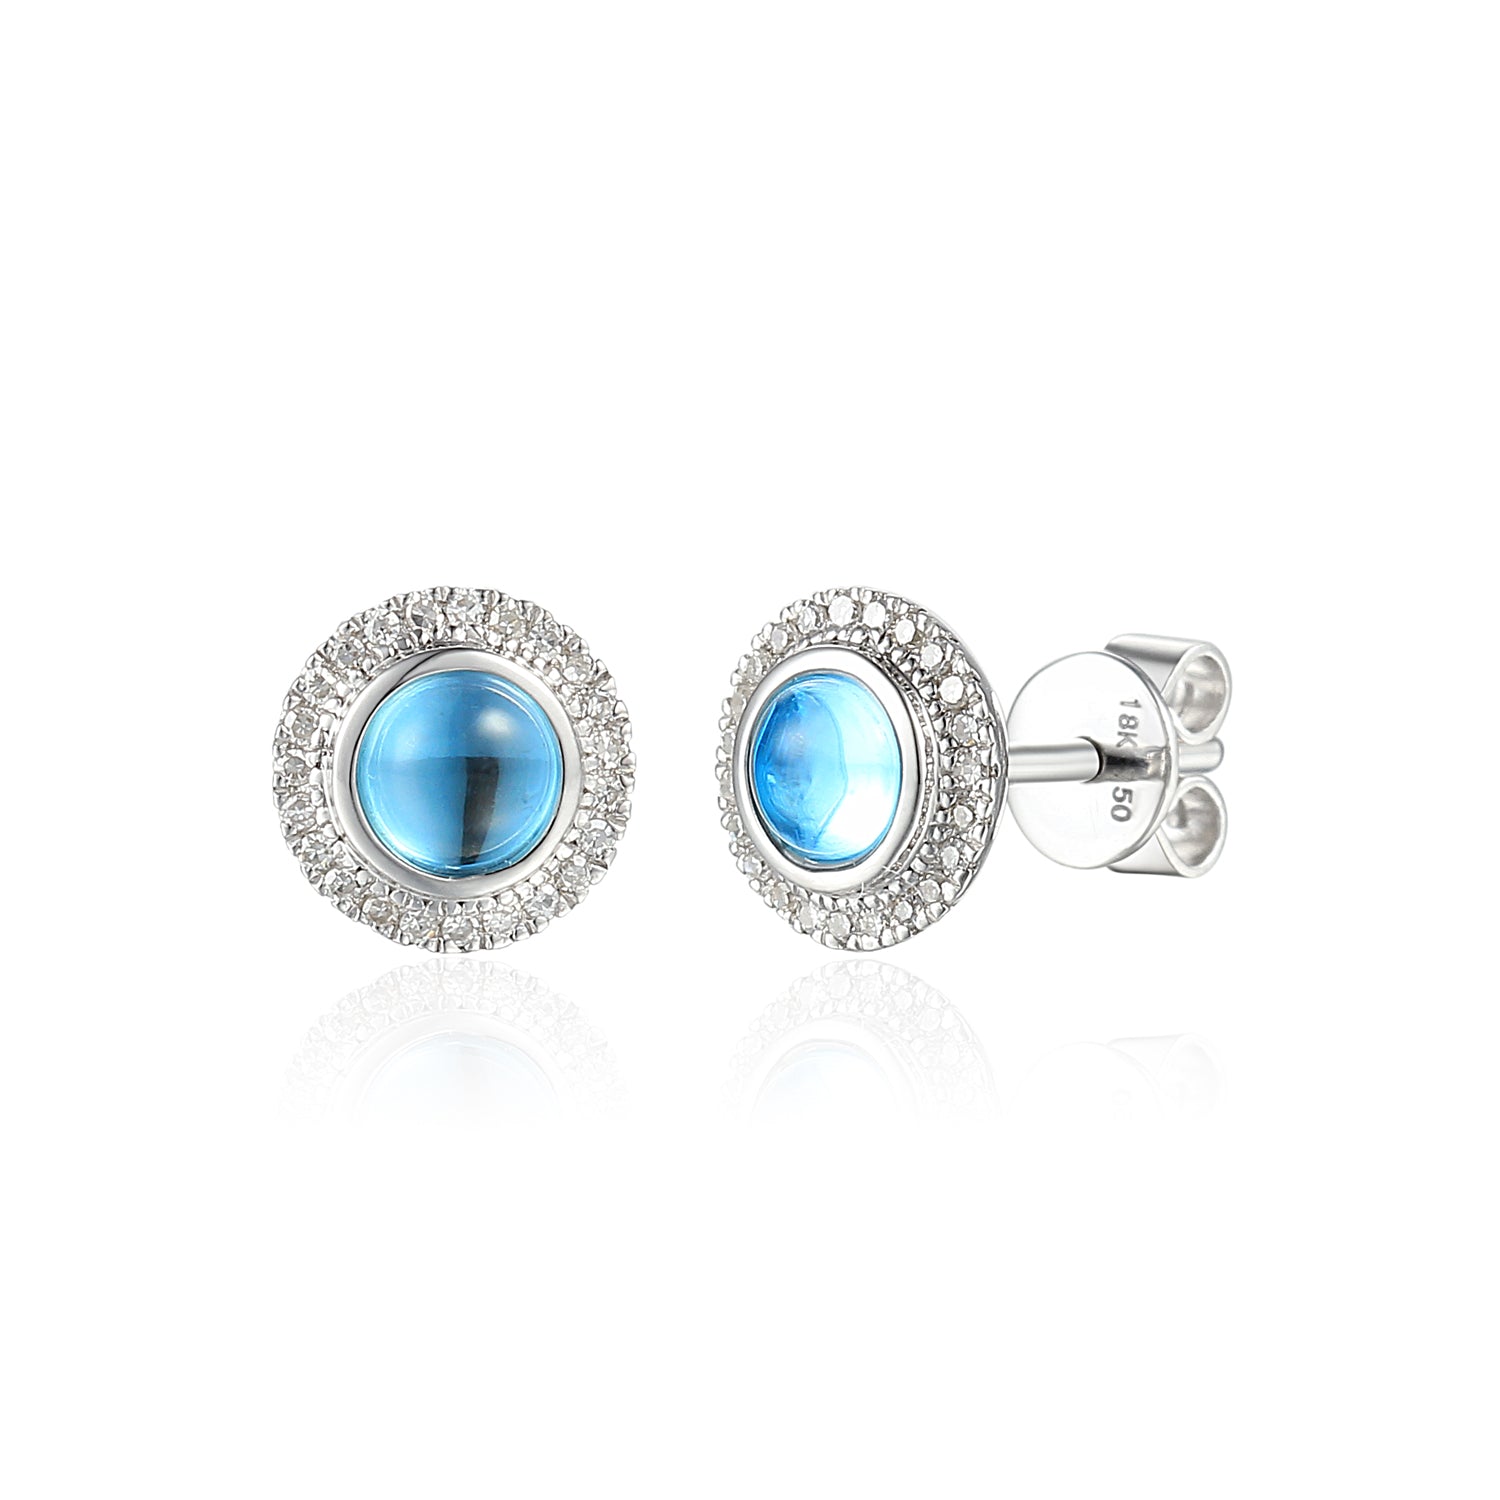 9ct White Gold Round Cabochon Blue Topaz and Diamond Earring